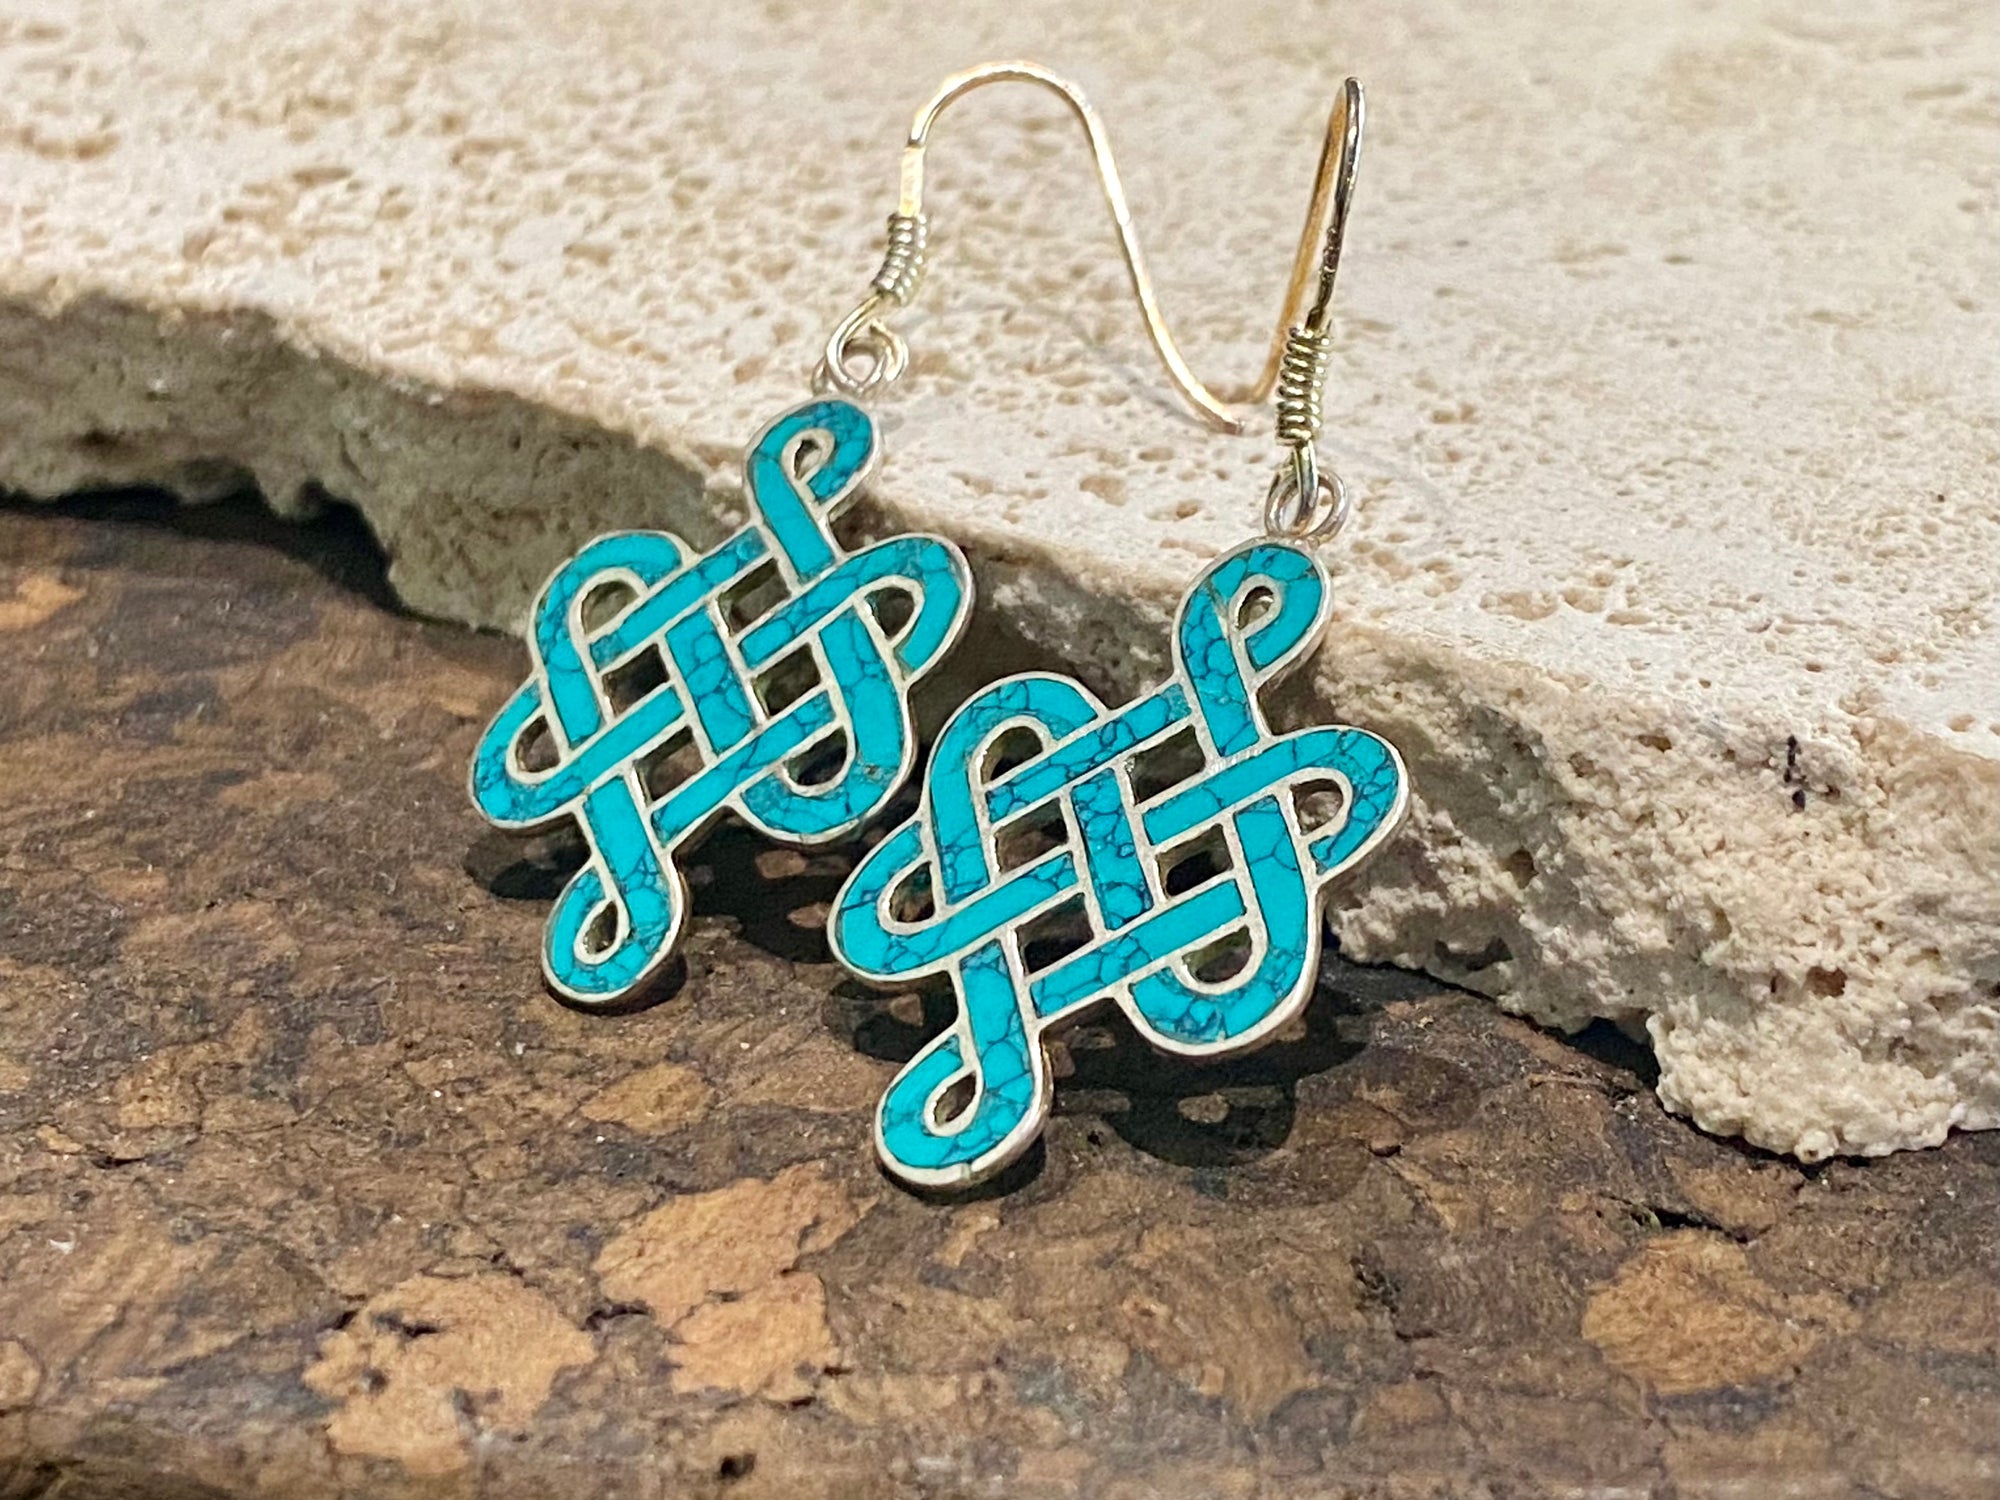 These sterling silver and turquoise earrings are the Buddhist symbol called the endless knot. They are finished with sterling silver hooks. Height 4.5 cm including hook.